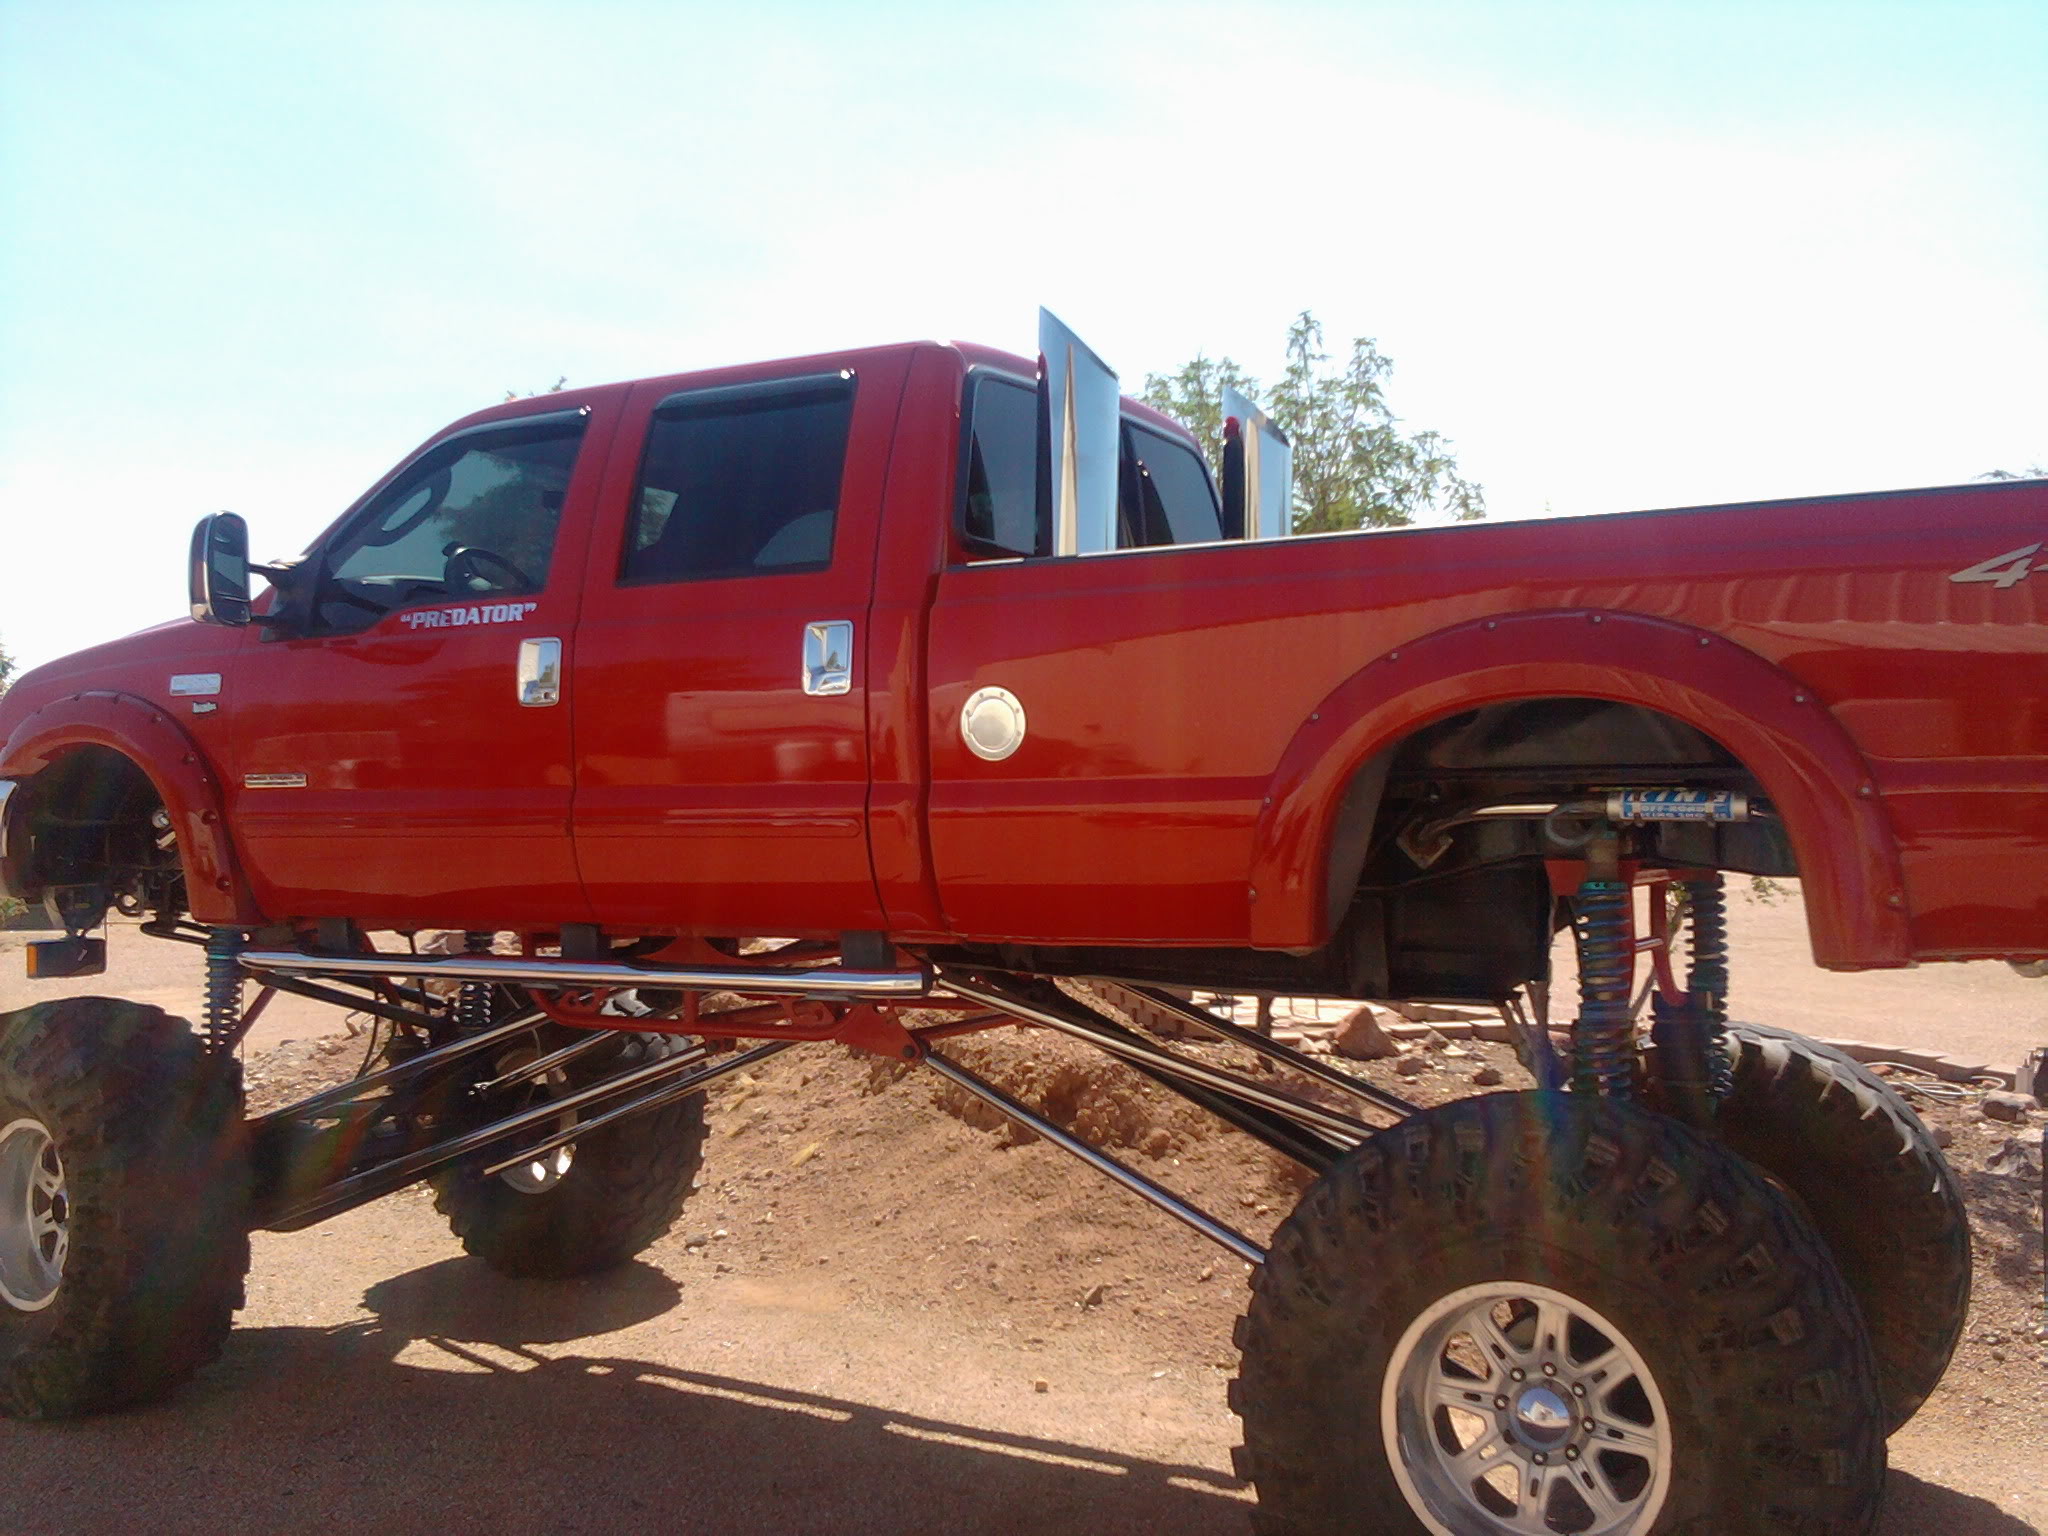 redneck lifted trucks with stacks